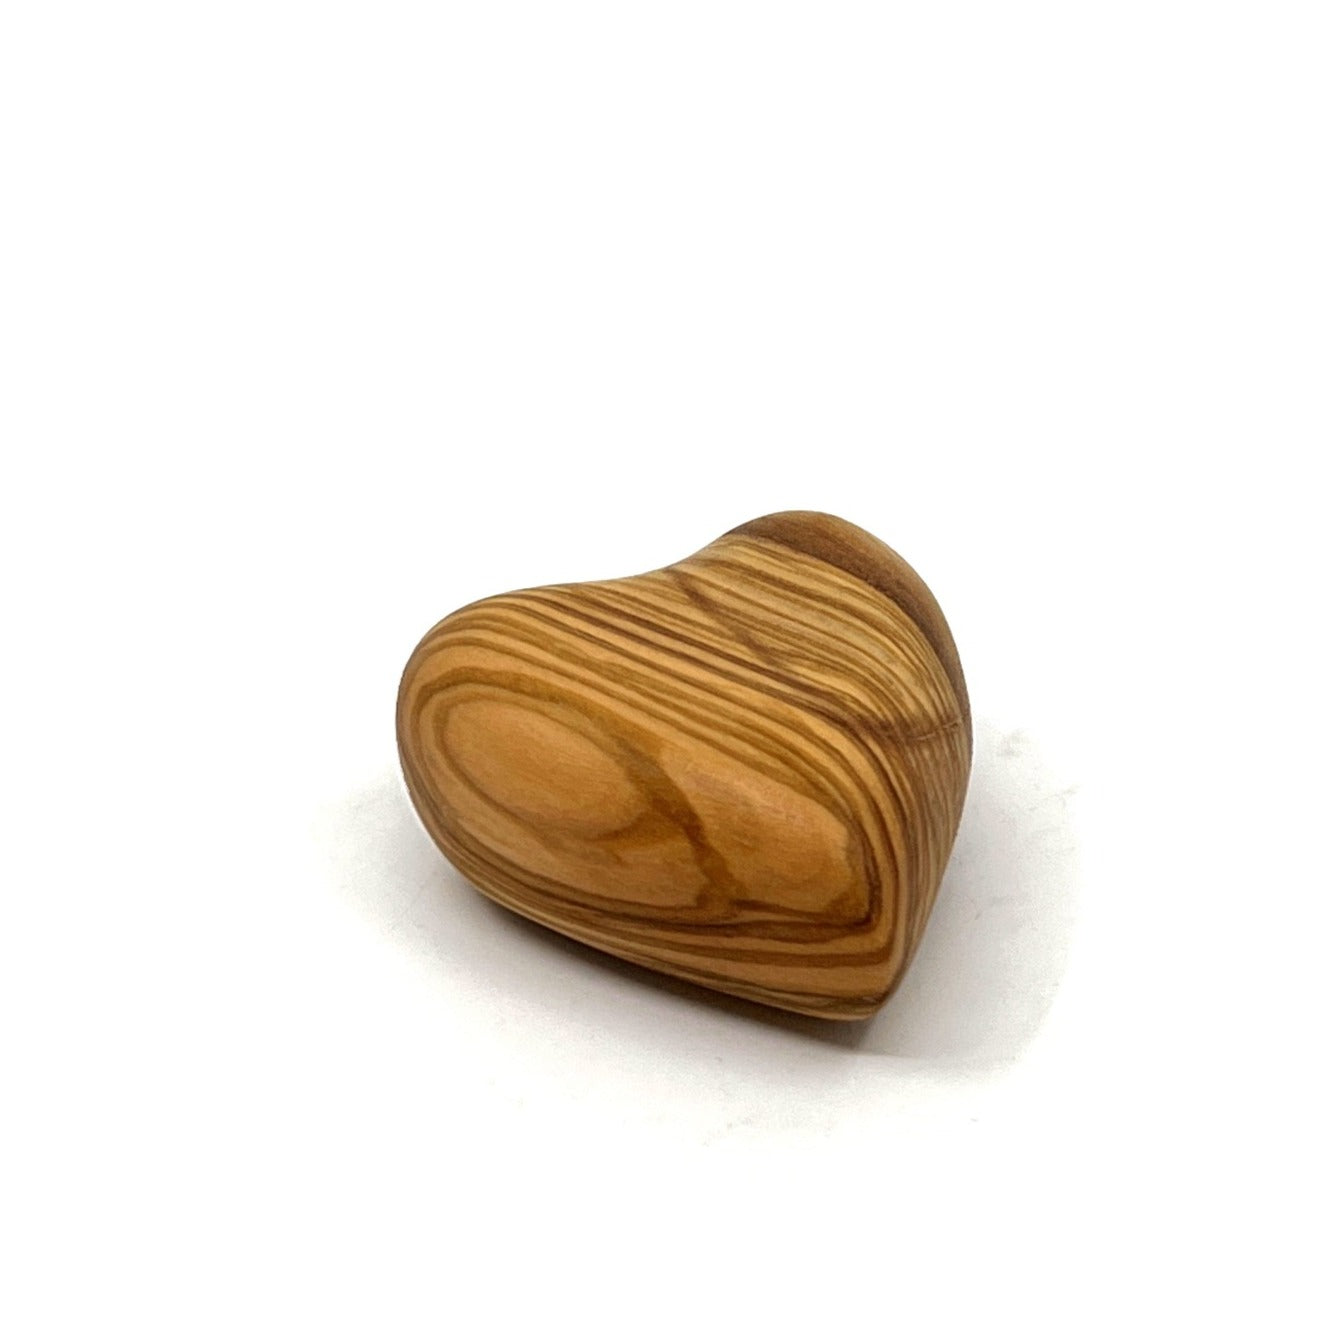 Wooden heart hand carved from olive wood grown in holy land gift